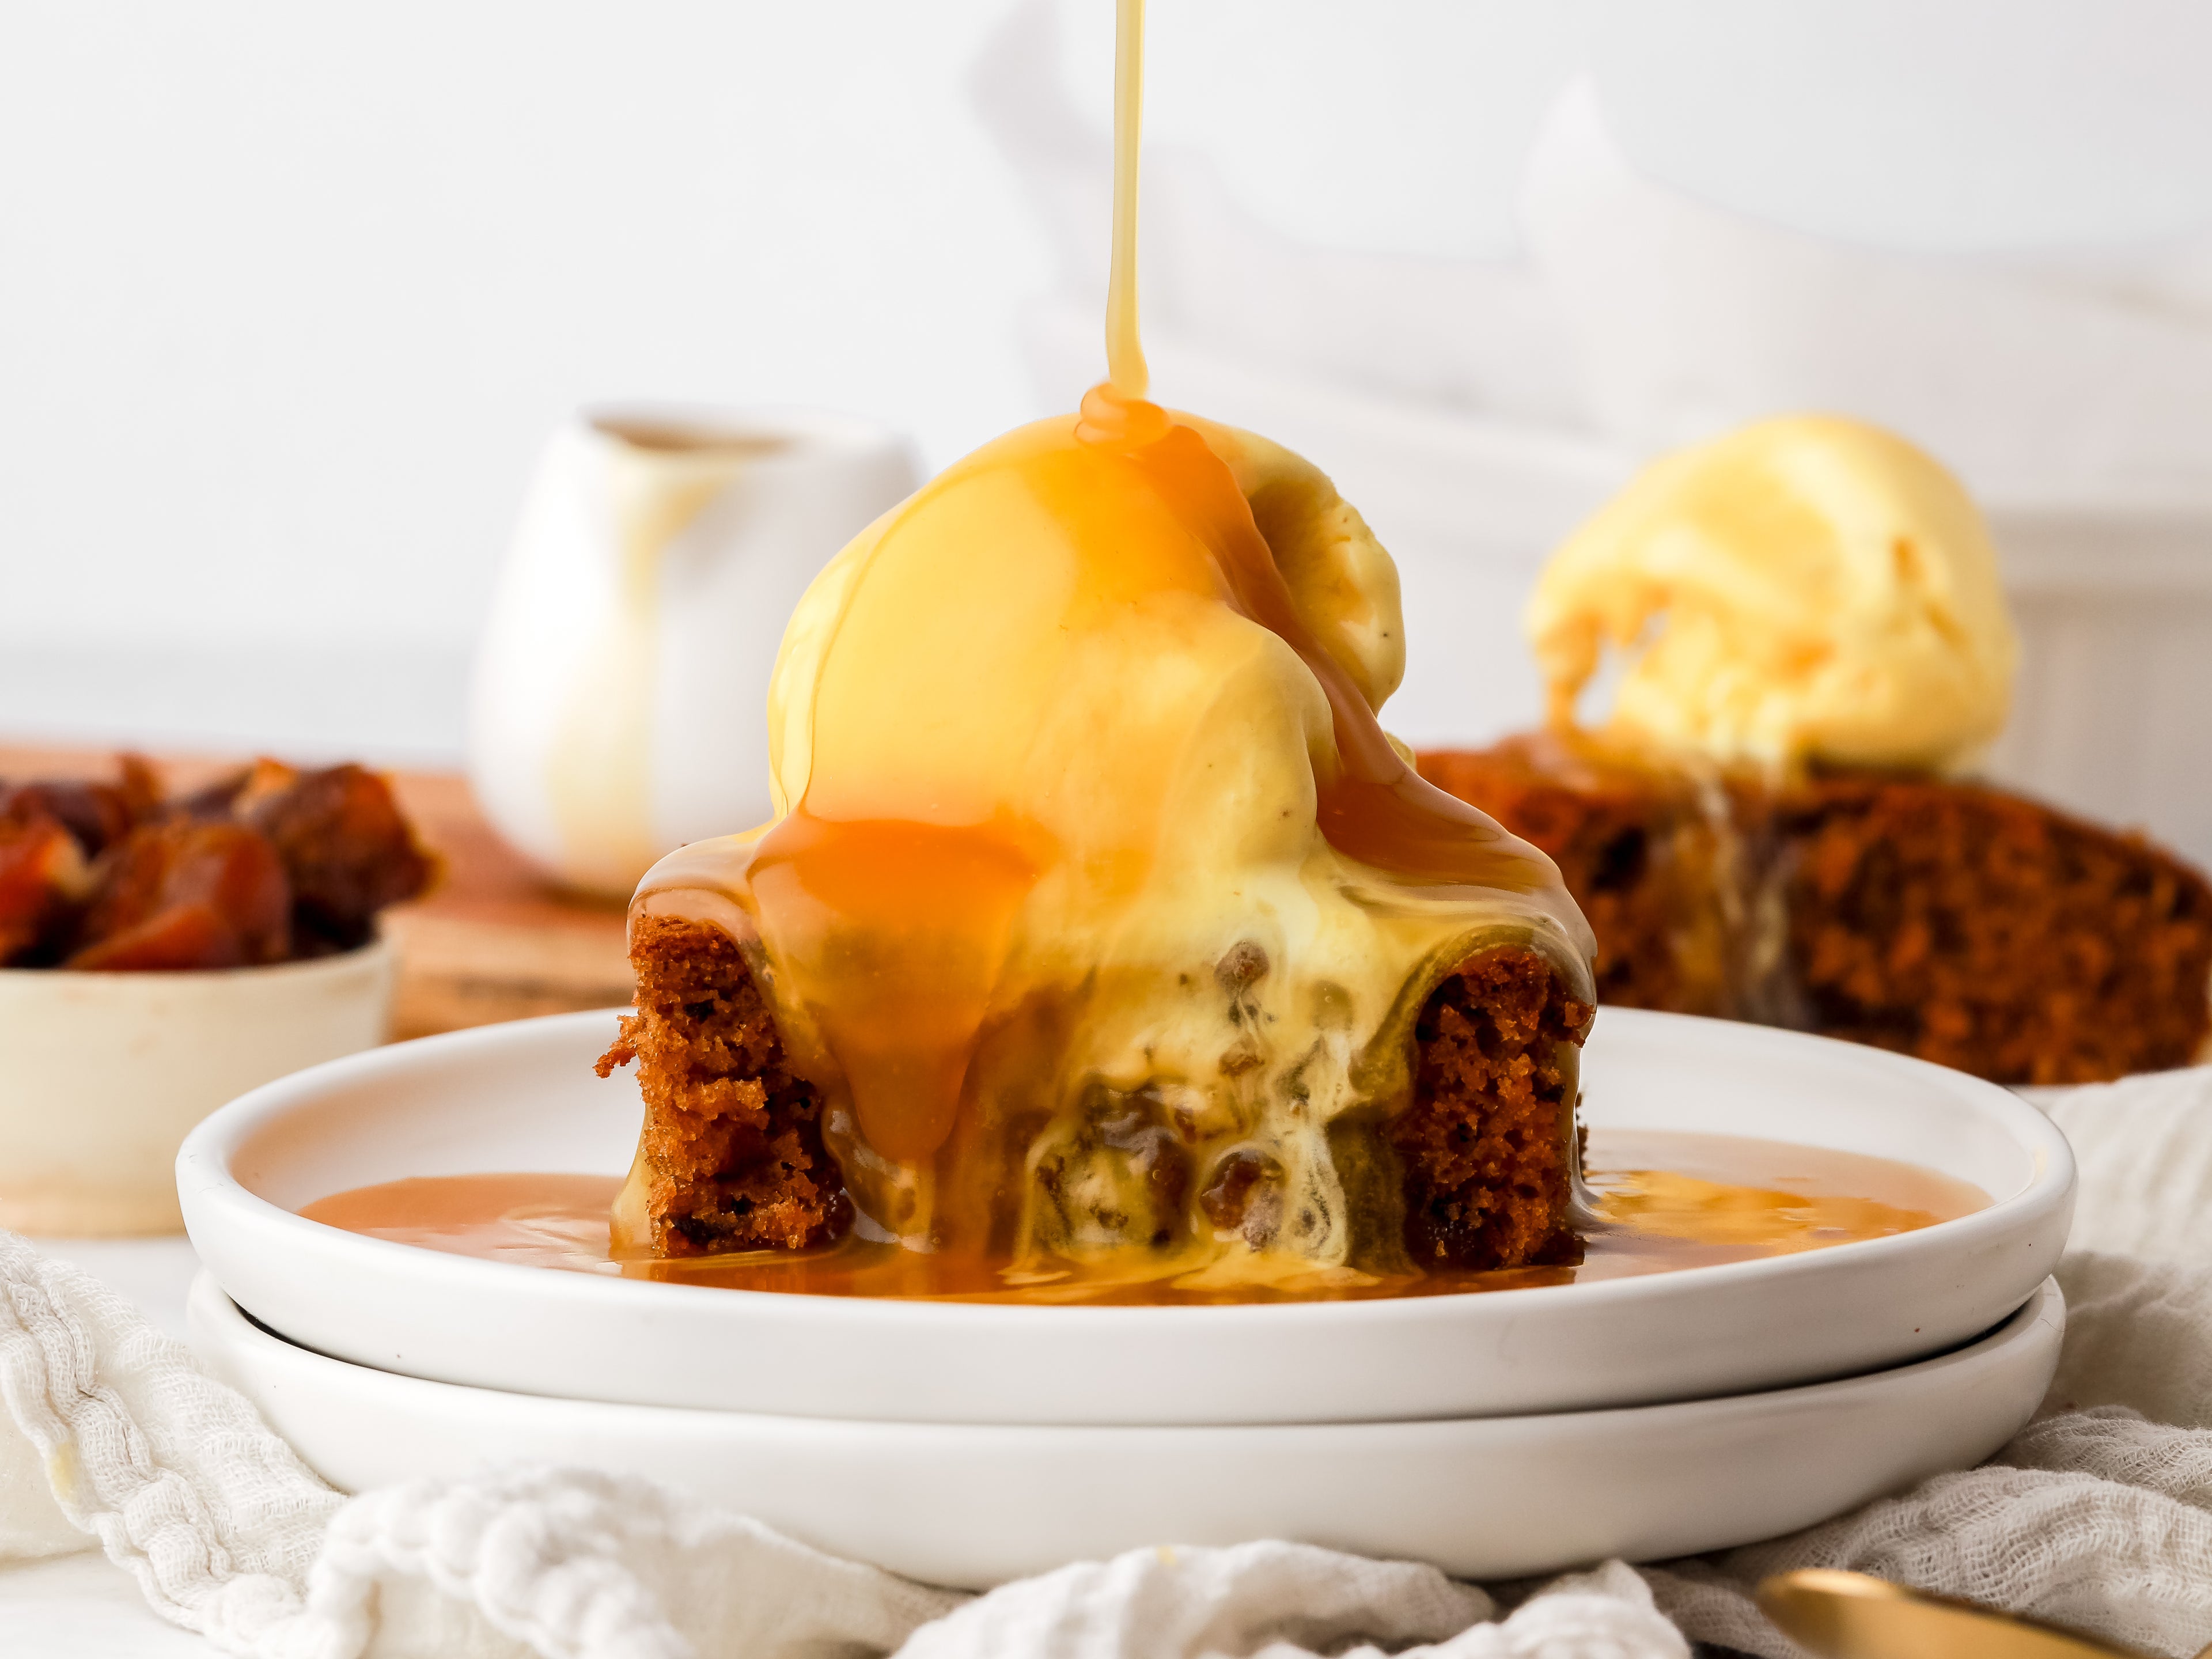 Sticky Toffee Pudding with caramel on top